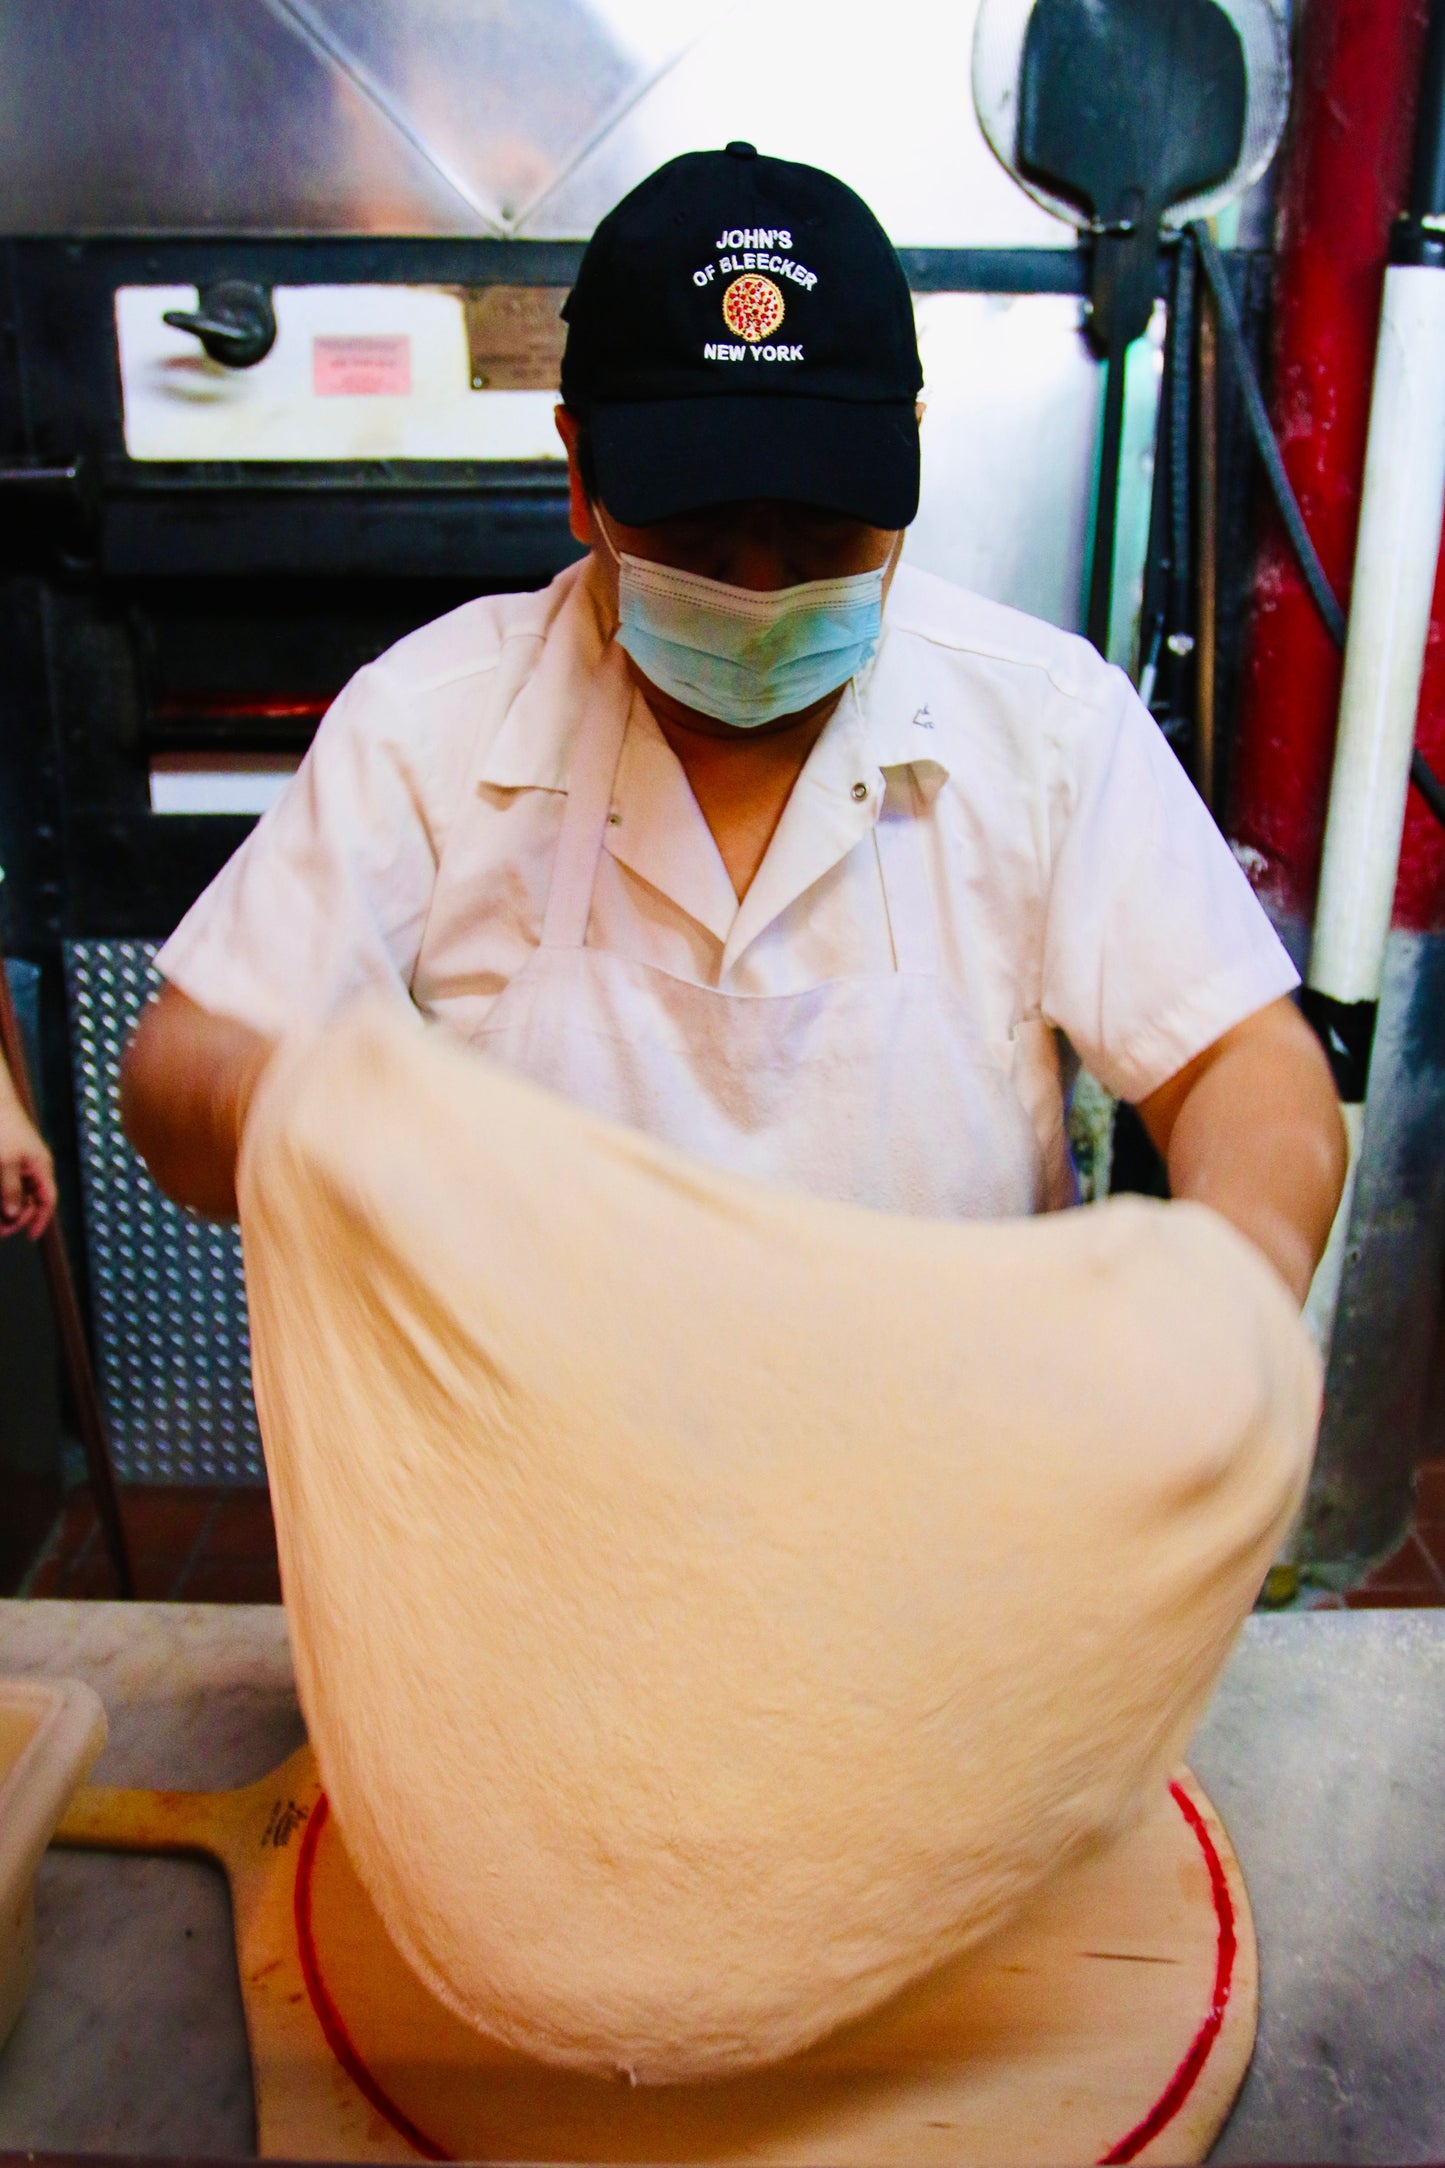 Man wearing the John's Pizza "No Slices" Hat  while making pizza dough